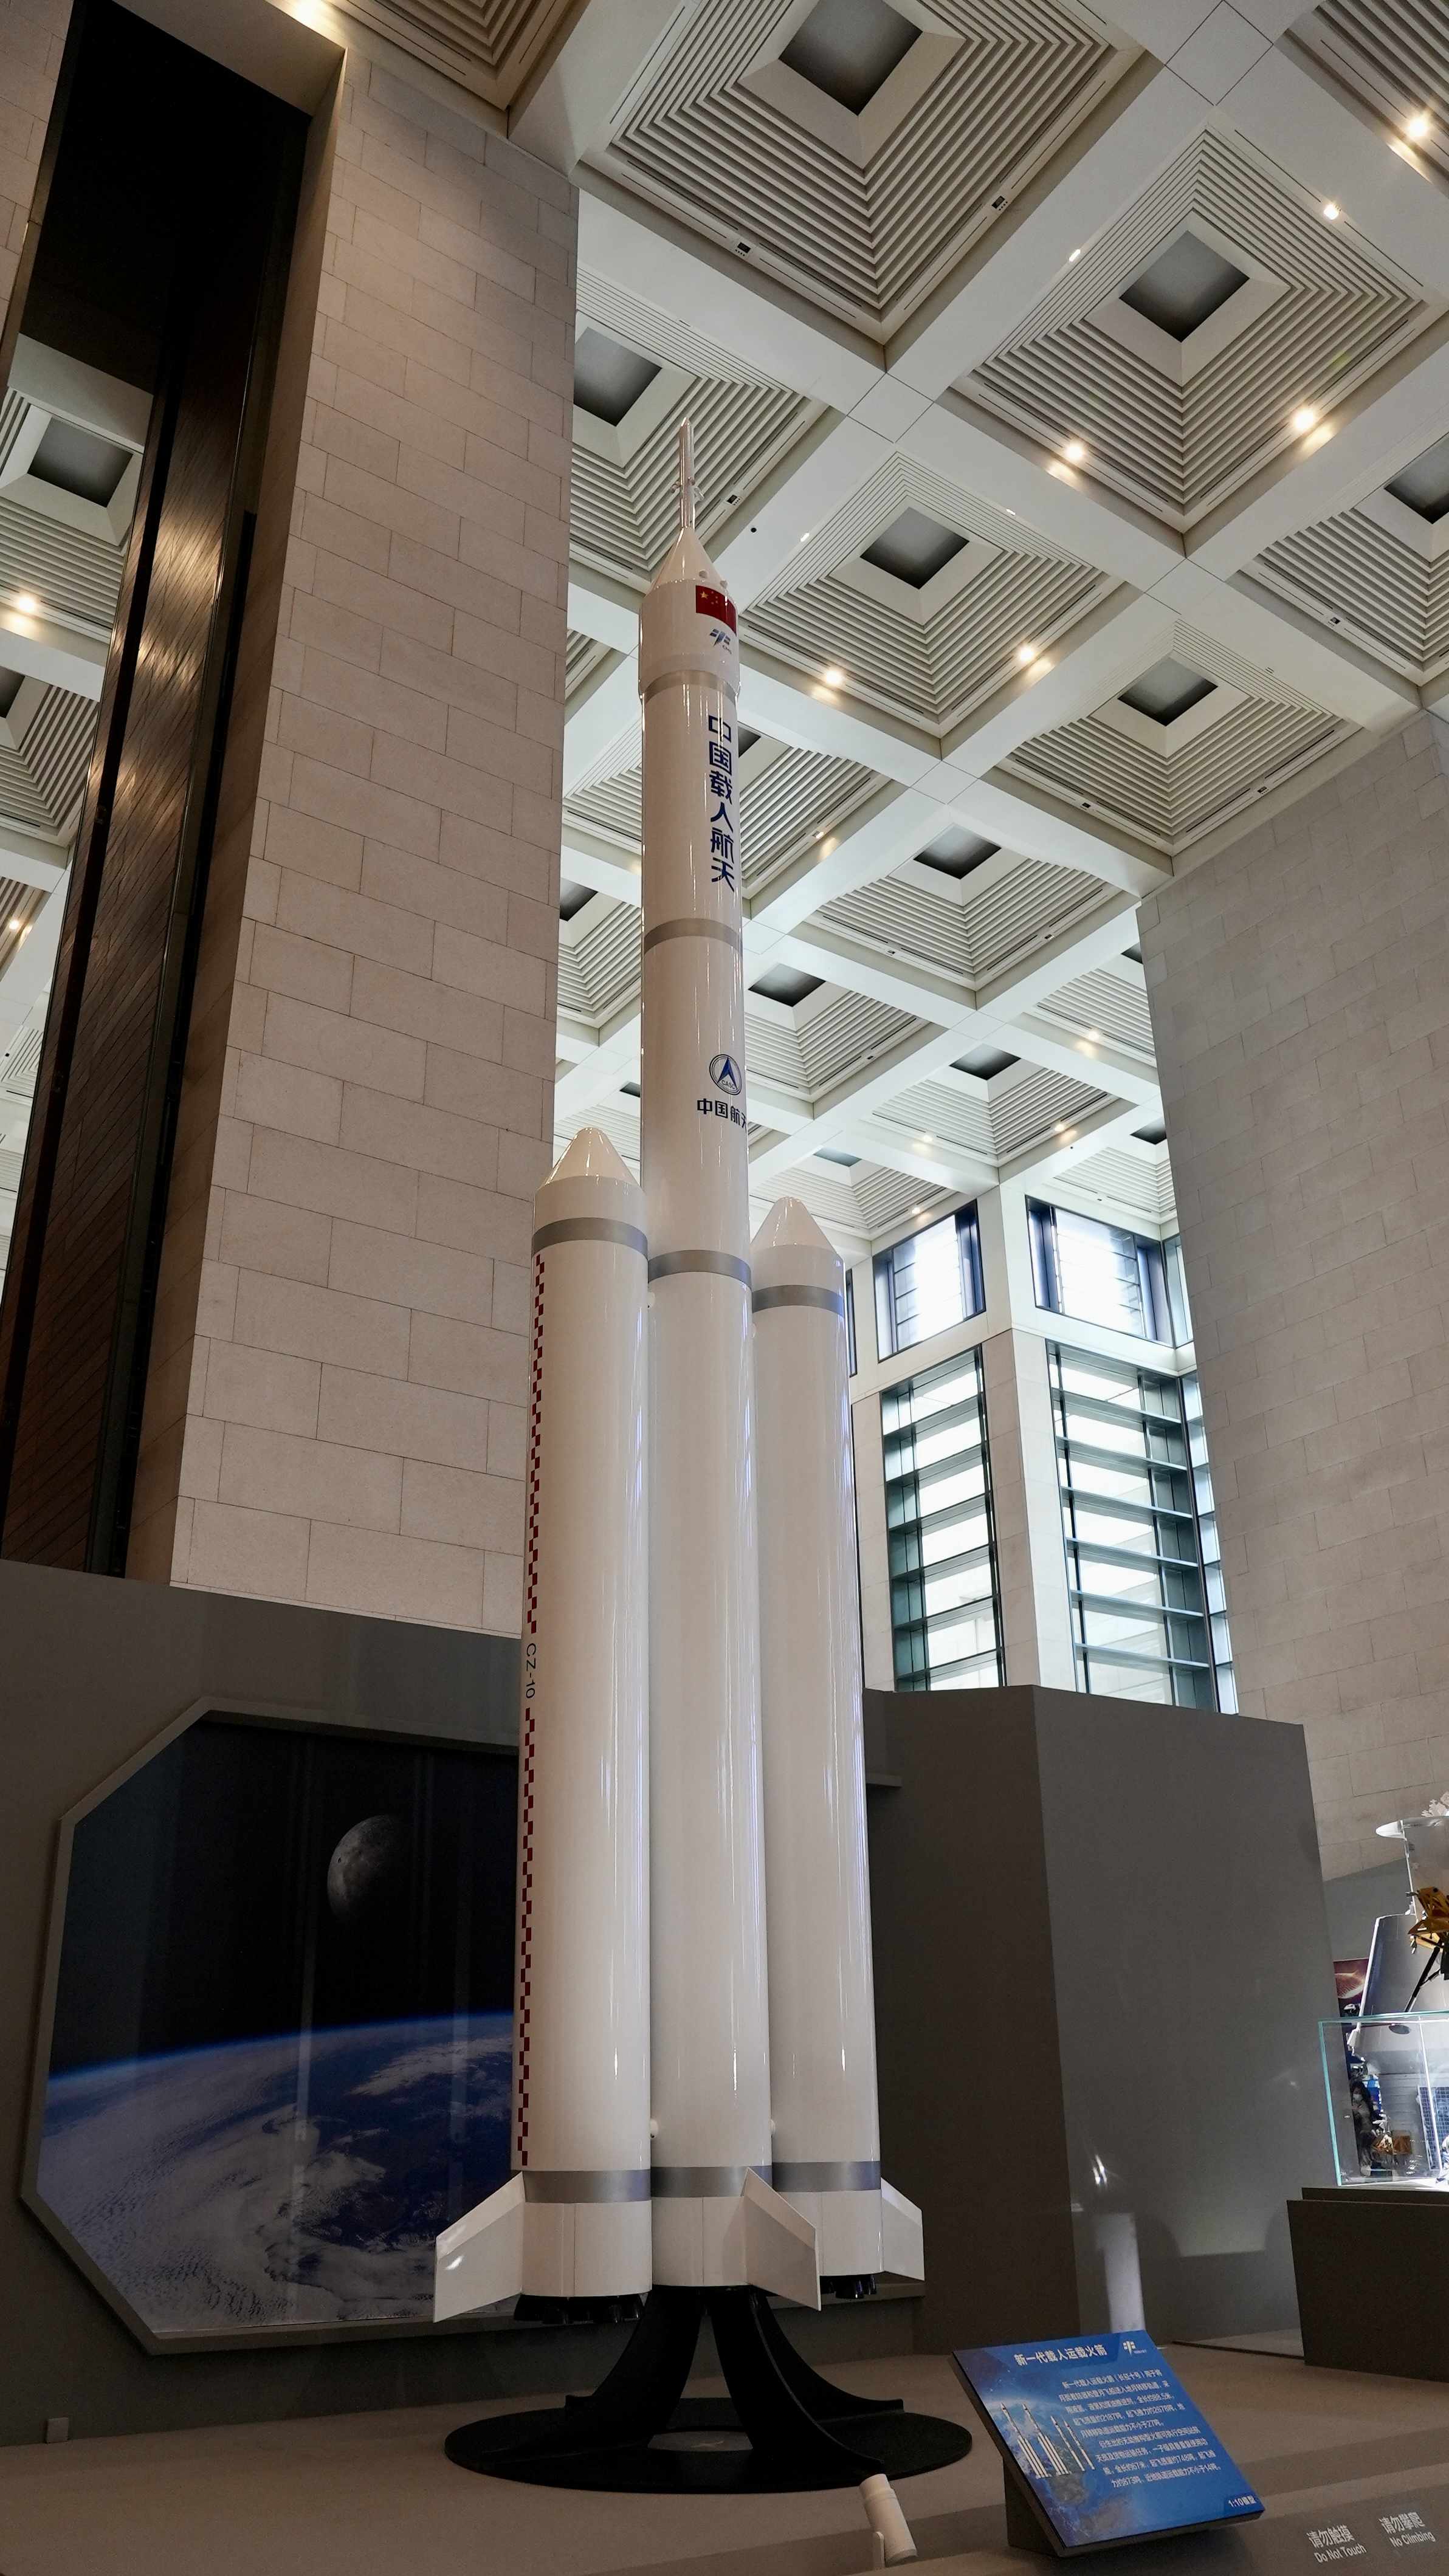 A model of China's next generation of manned launch vehicle, the Long March-10, displayed in Beijing. /China Media Group